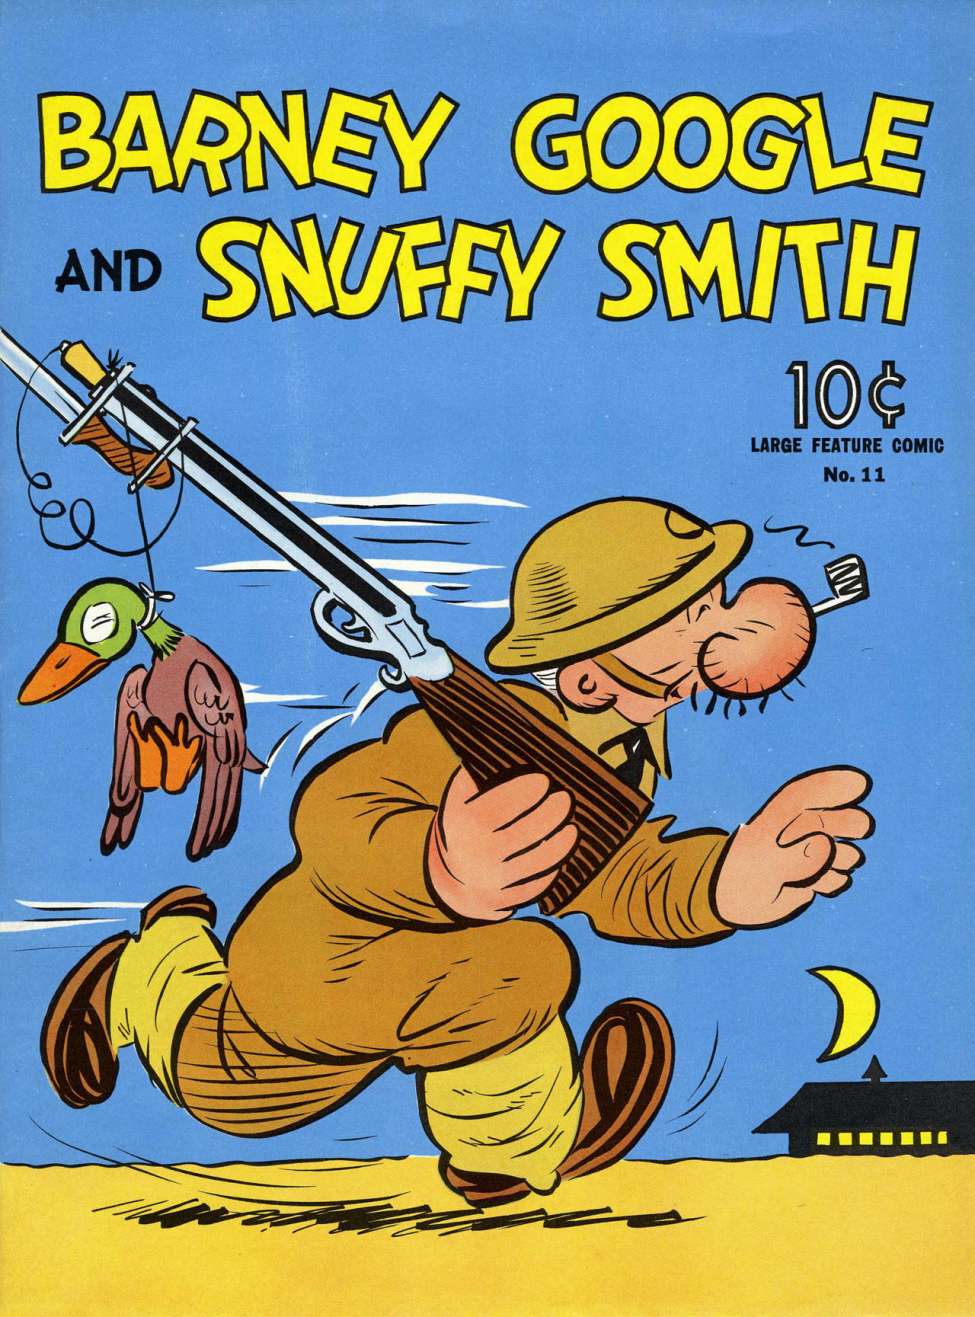 Book Cover For Large Feature Comic v2 11 - Barney Google and Snuffy Smith